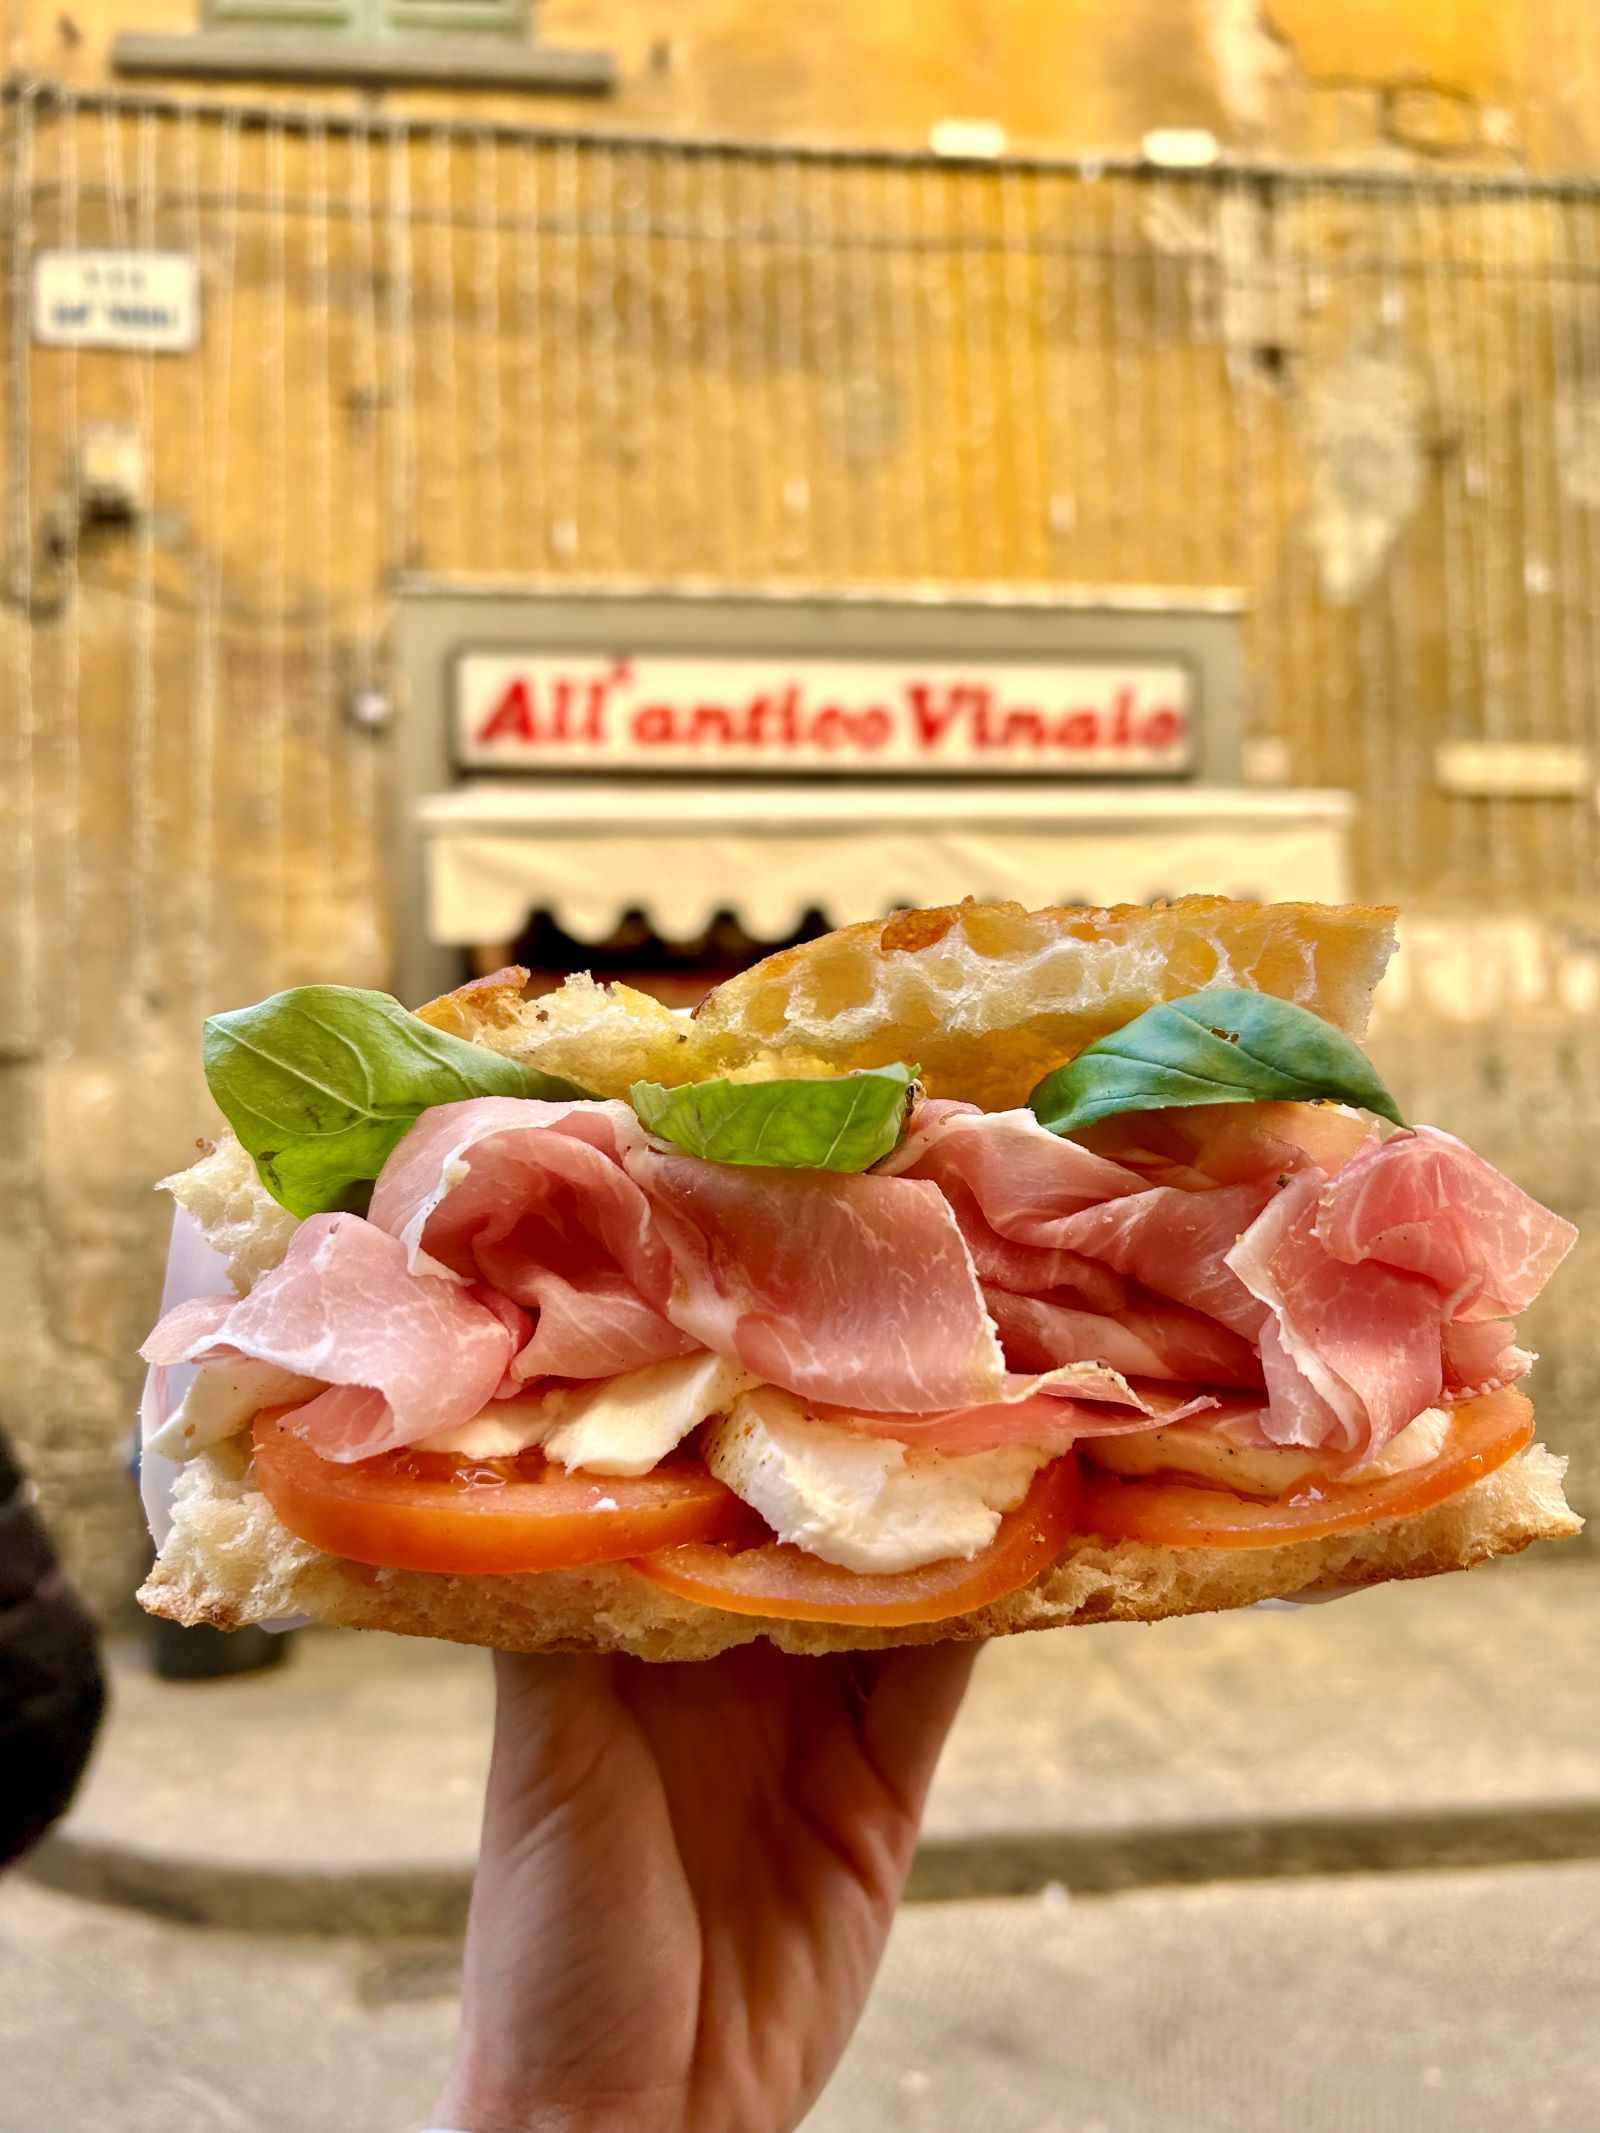 An image of a sandwich from All’Antico Vinaio.